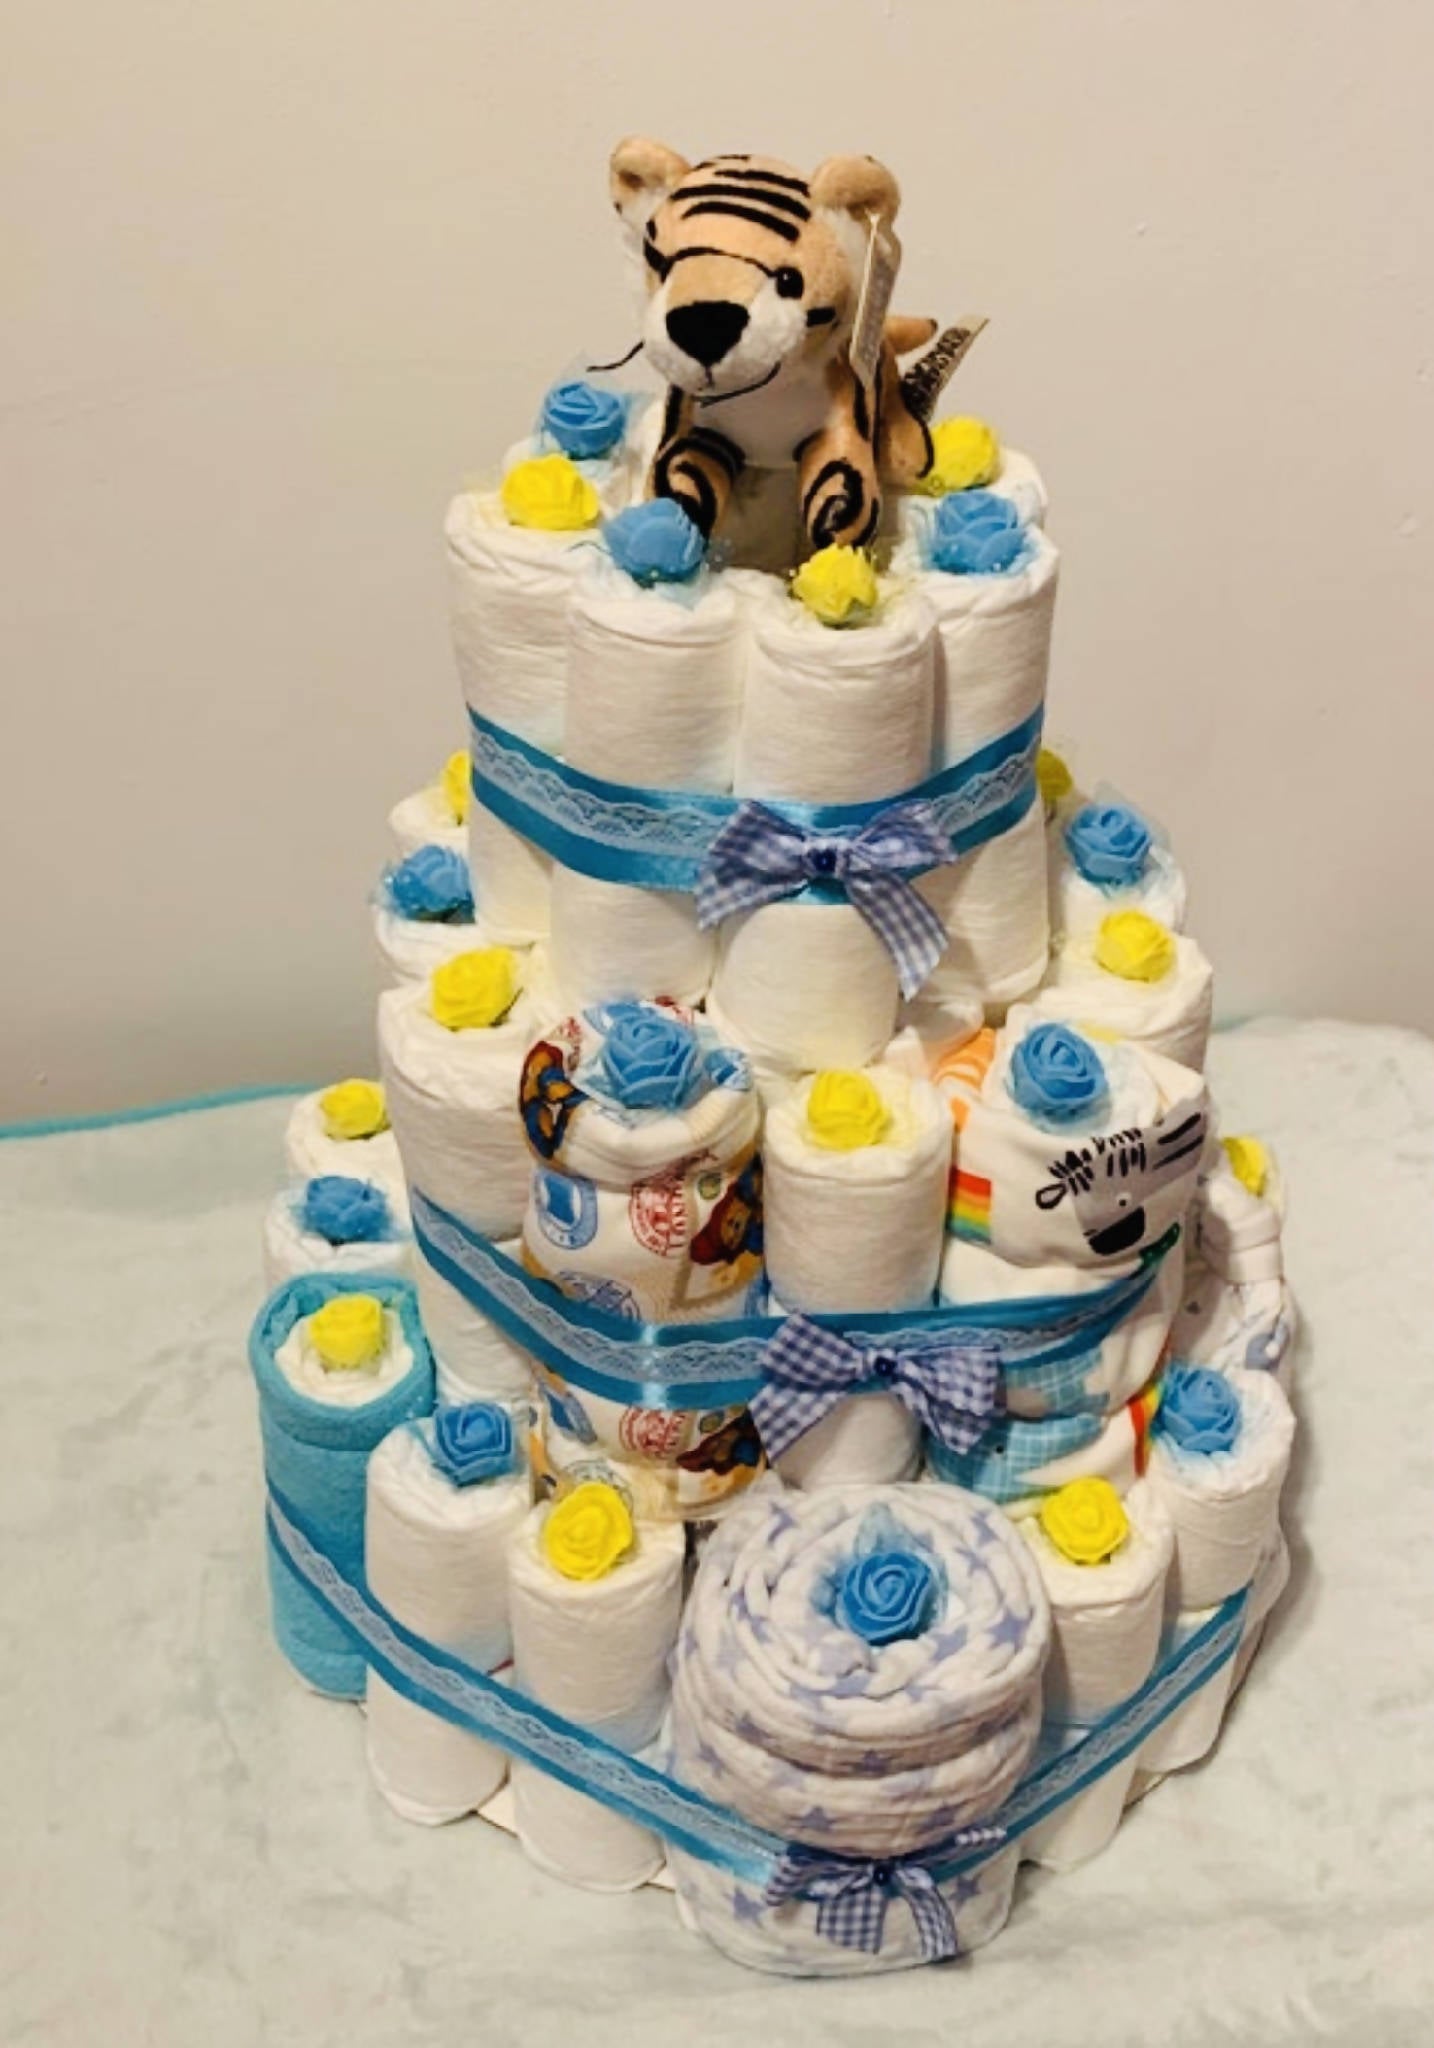 3 tier nappy gift cake - blue with teddy